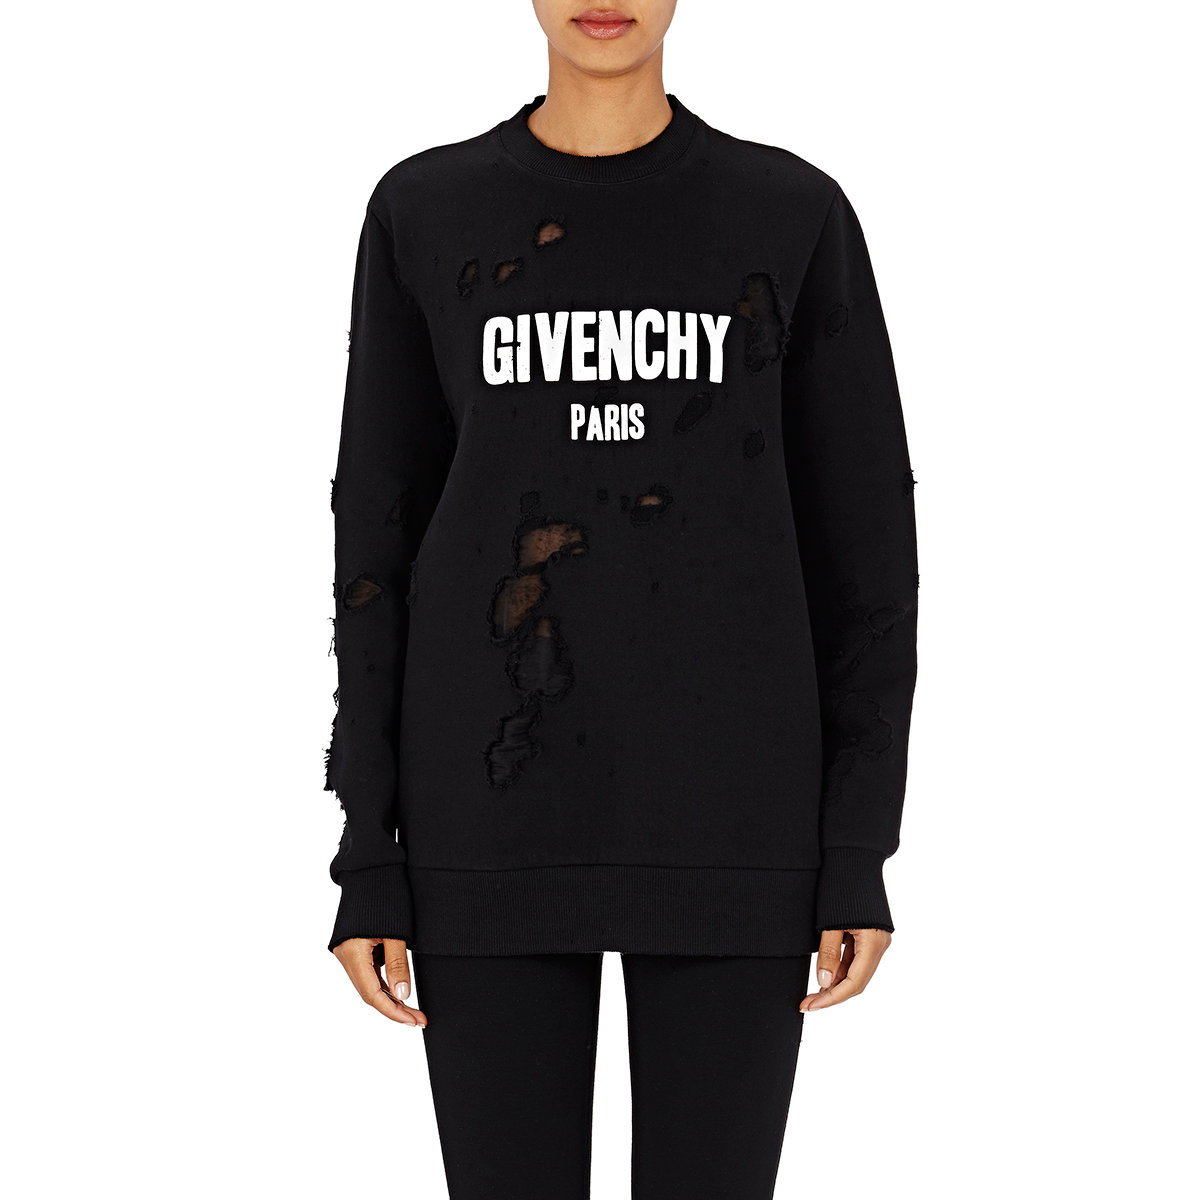 givenchy hoodie price